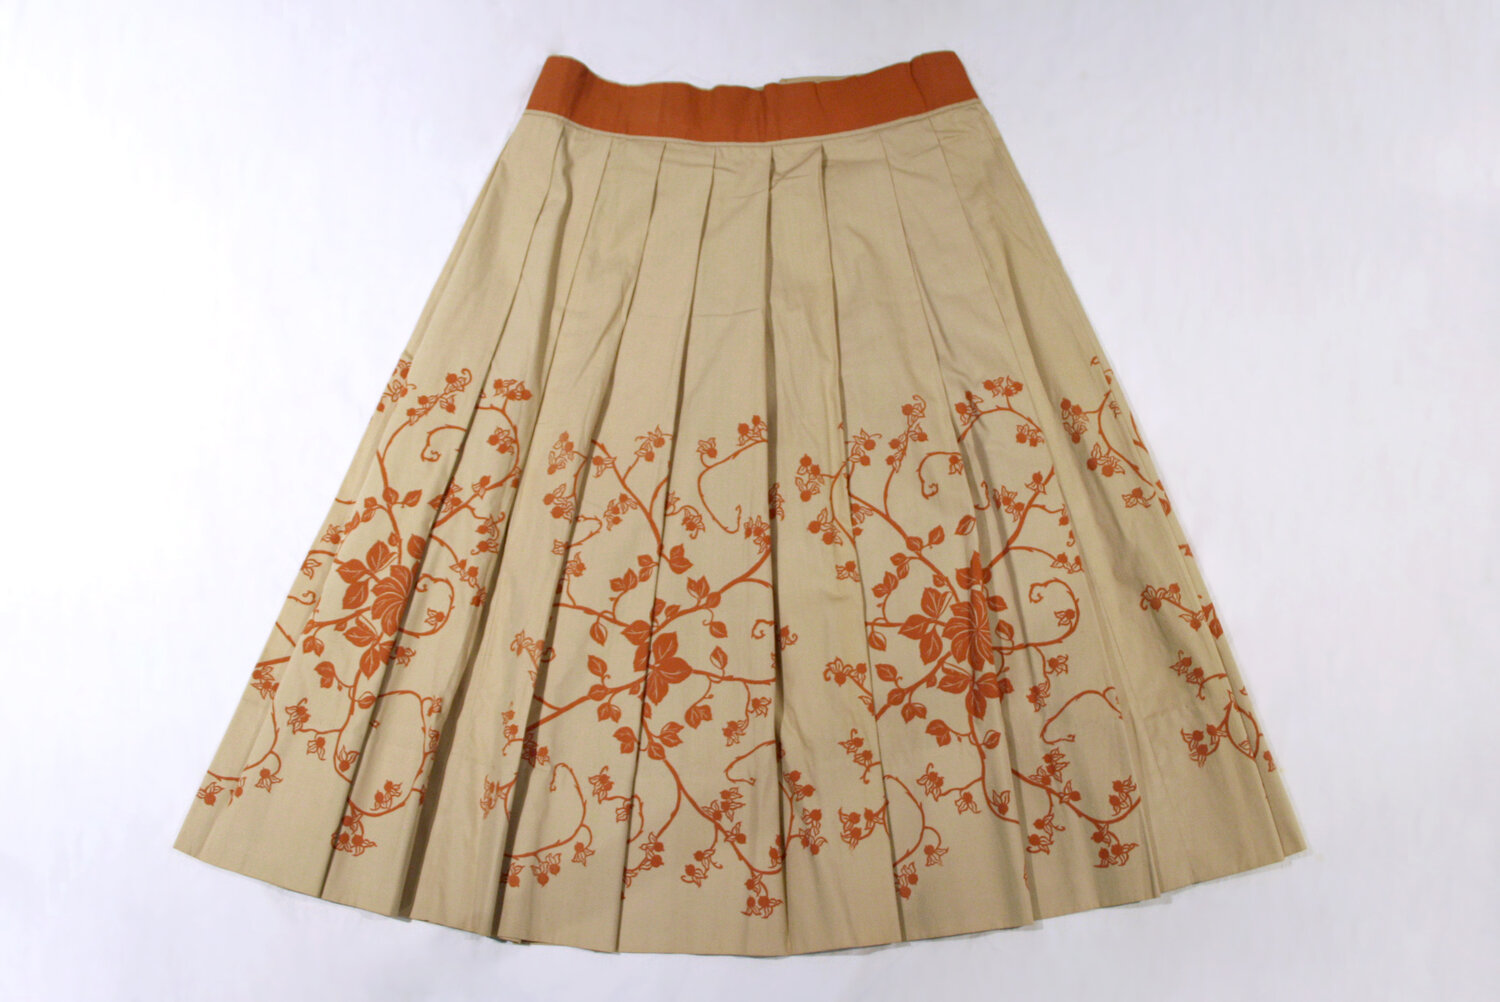 Barbara Souza Hoffman (1923-2010).  Woman's Skirt made with cotton printed with Hoffman's Bittersweet design, 1951.